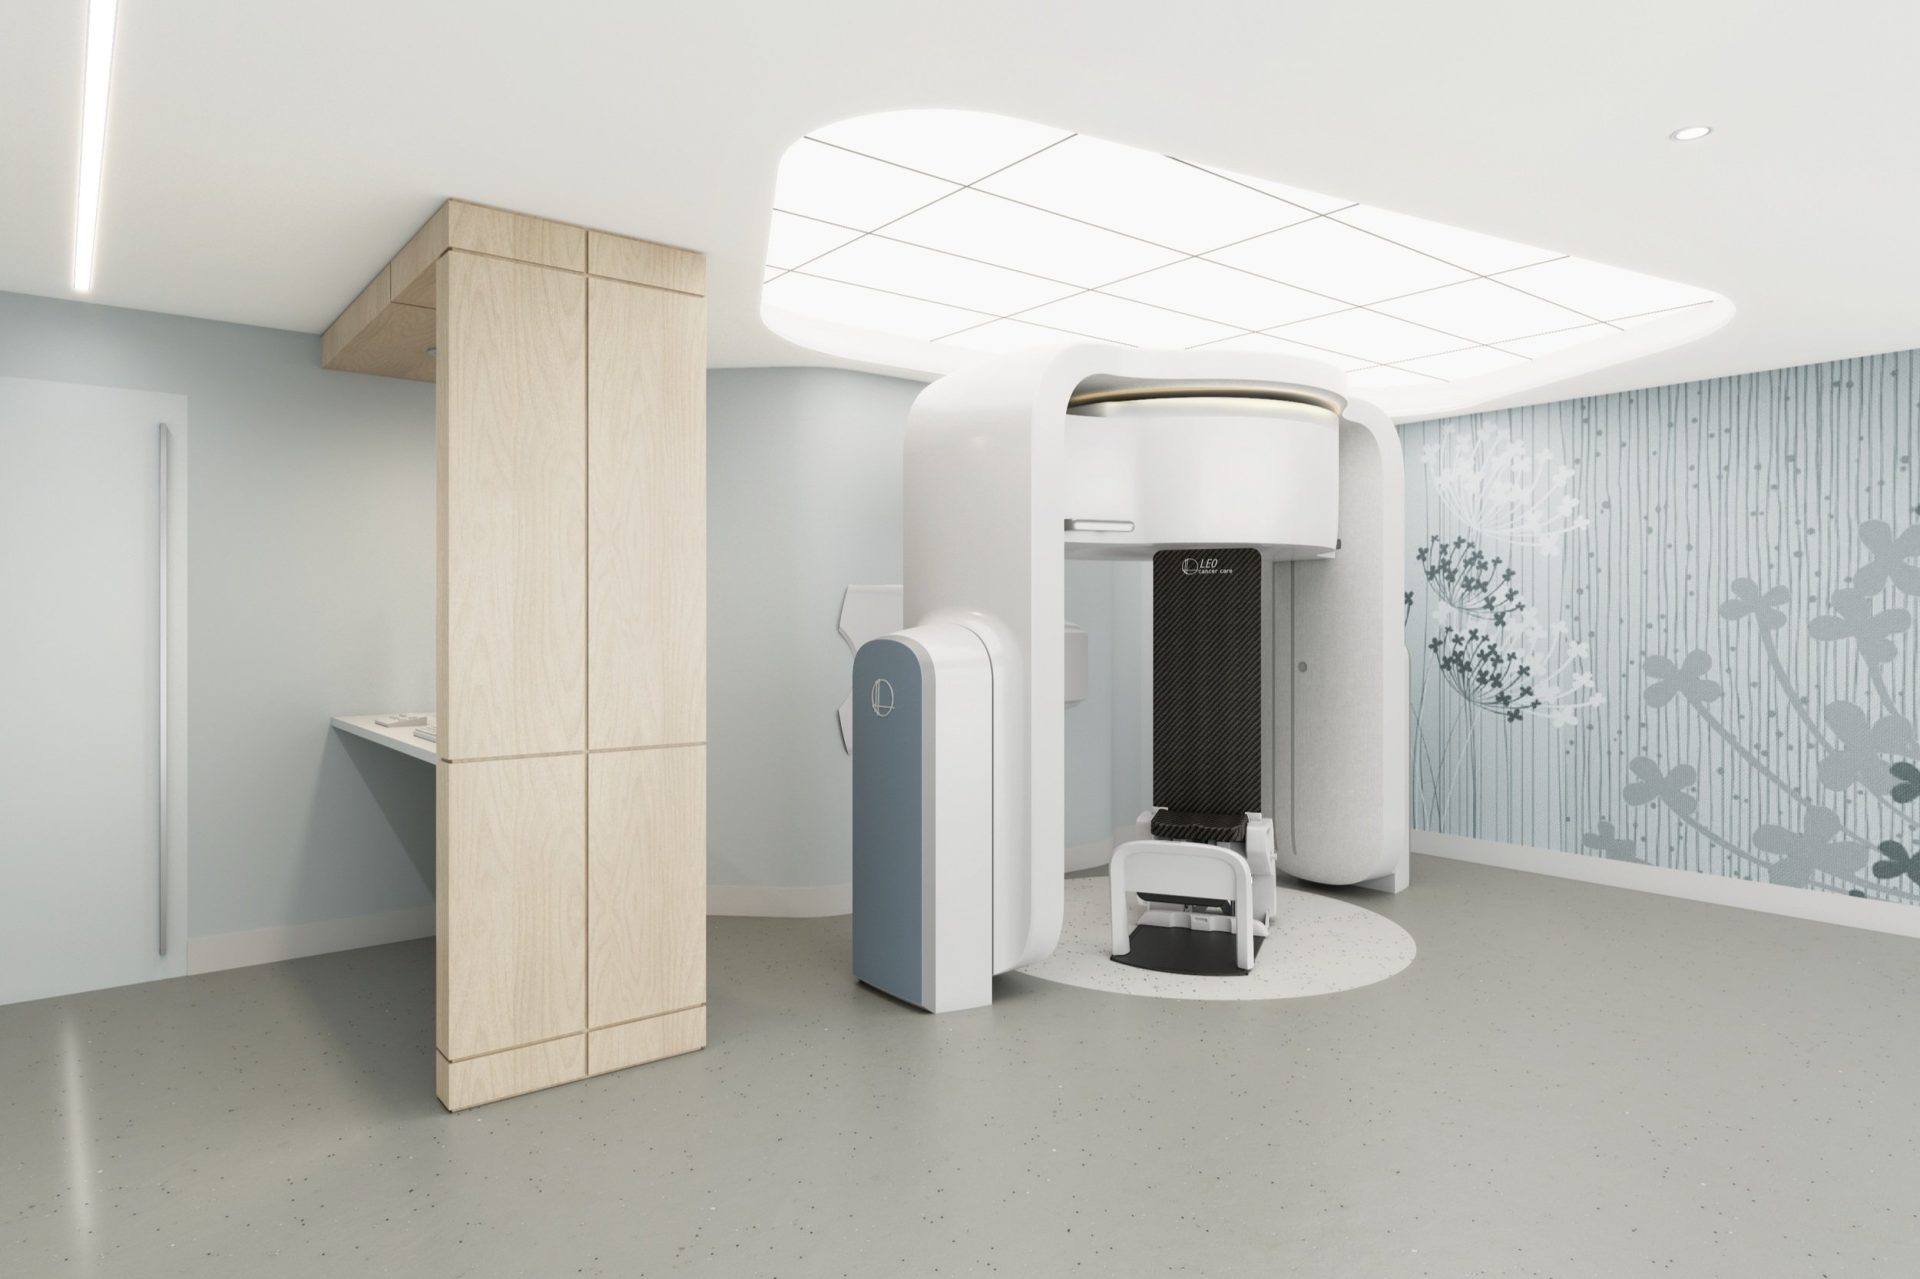 A modern clinic with the Leo Cancer Care upright radiation therapy system, comfortable seating, and calming interior design.